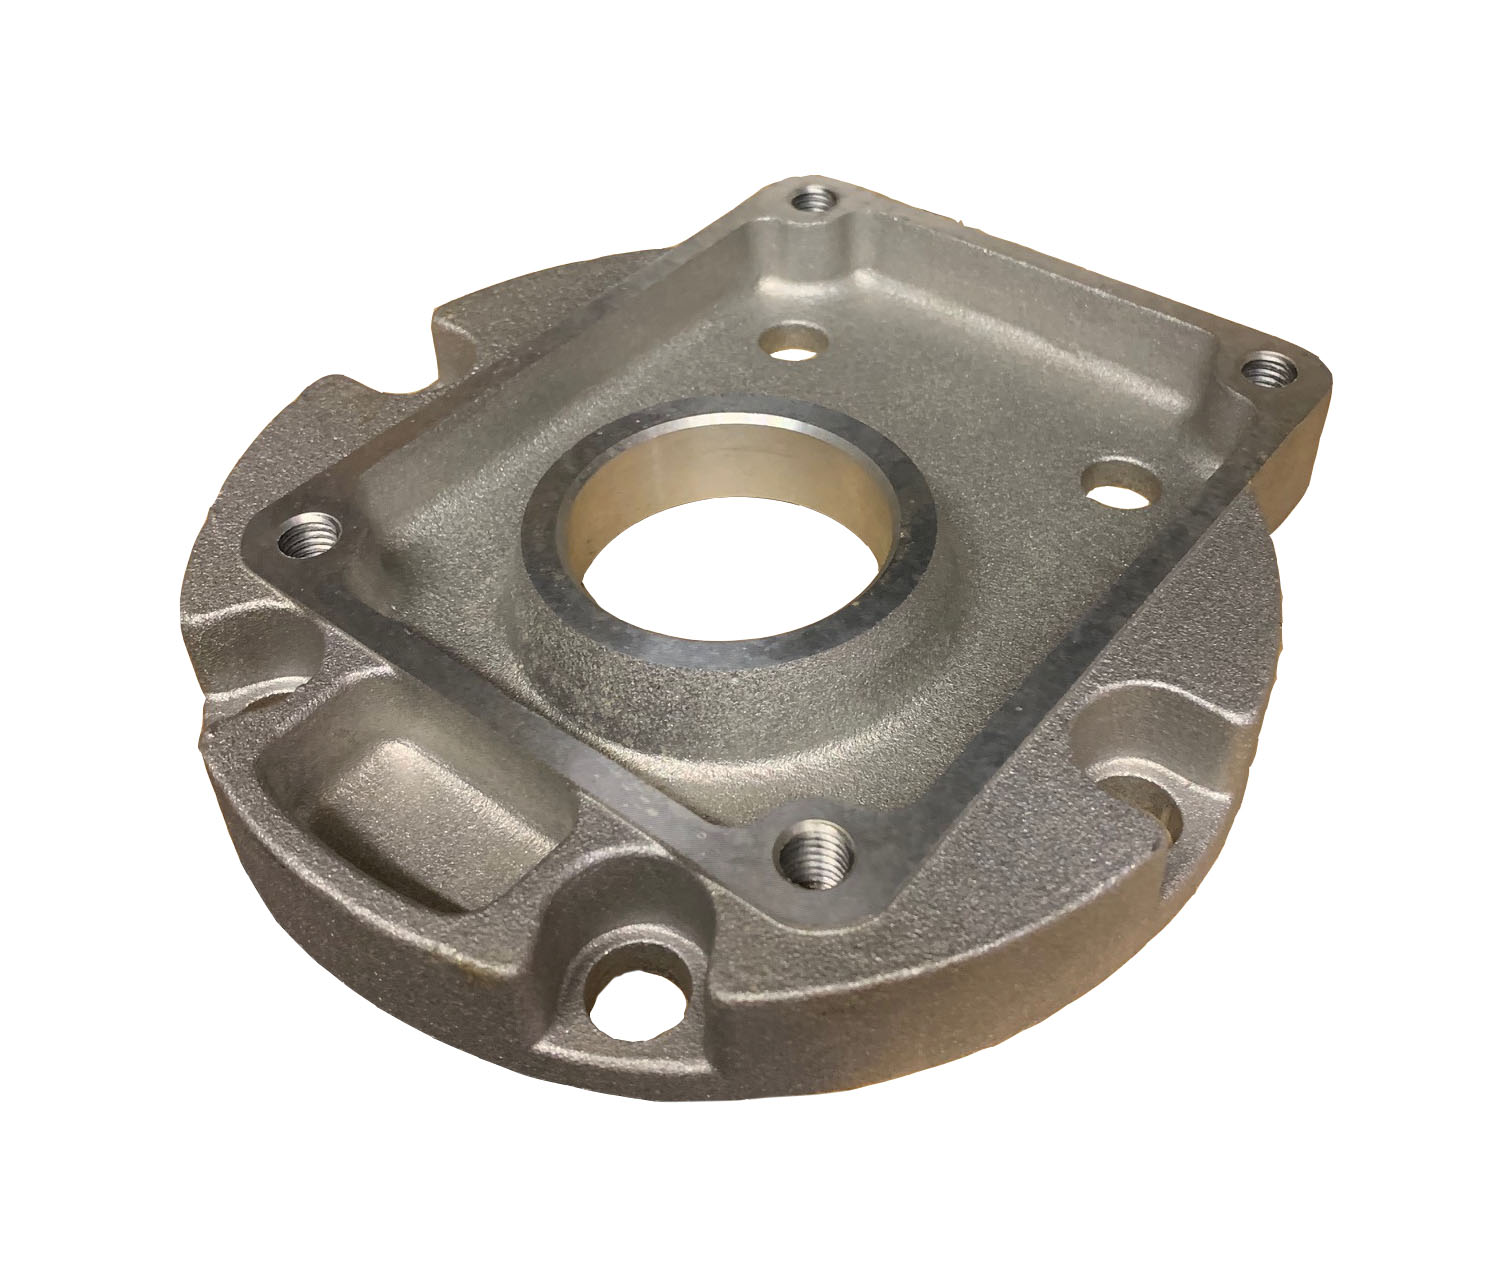 Flange to suit Series 30500 Mechanical Clutch, Group 3 Flange with Socket and Capscrews